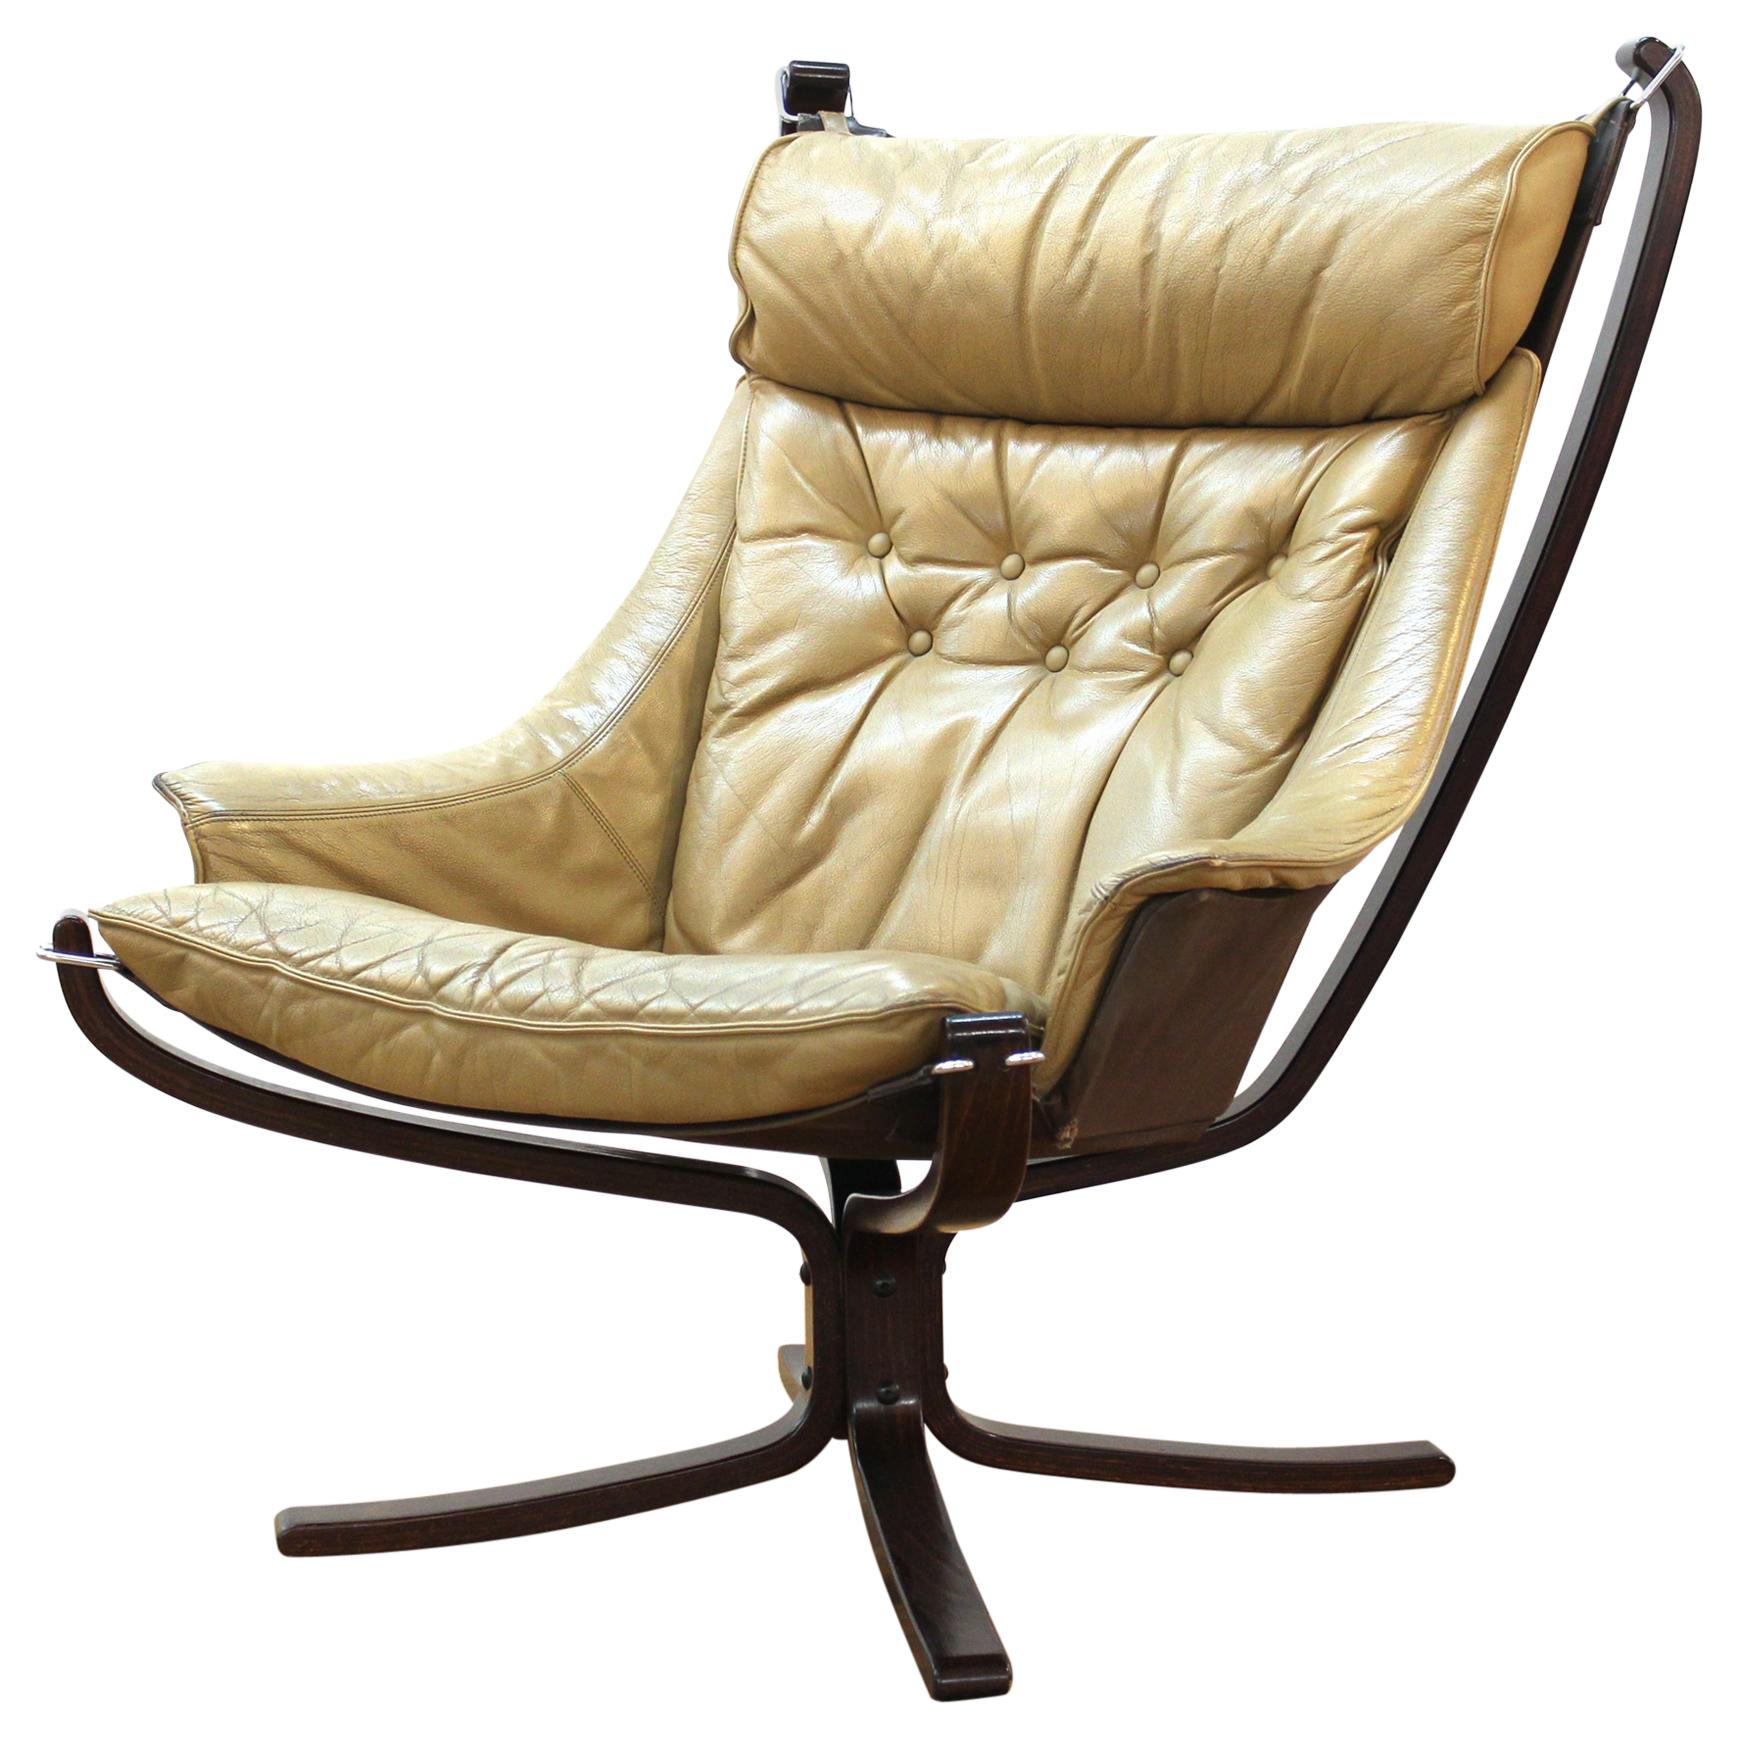 Sigurd Ressell for Vatne 'Viking' Scandinavian Modern Lounge Chair in Leather